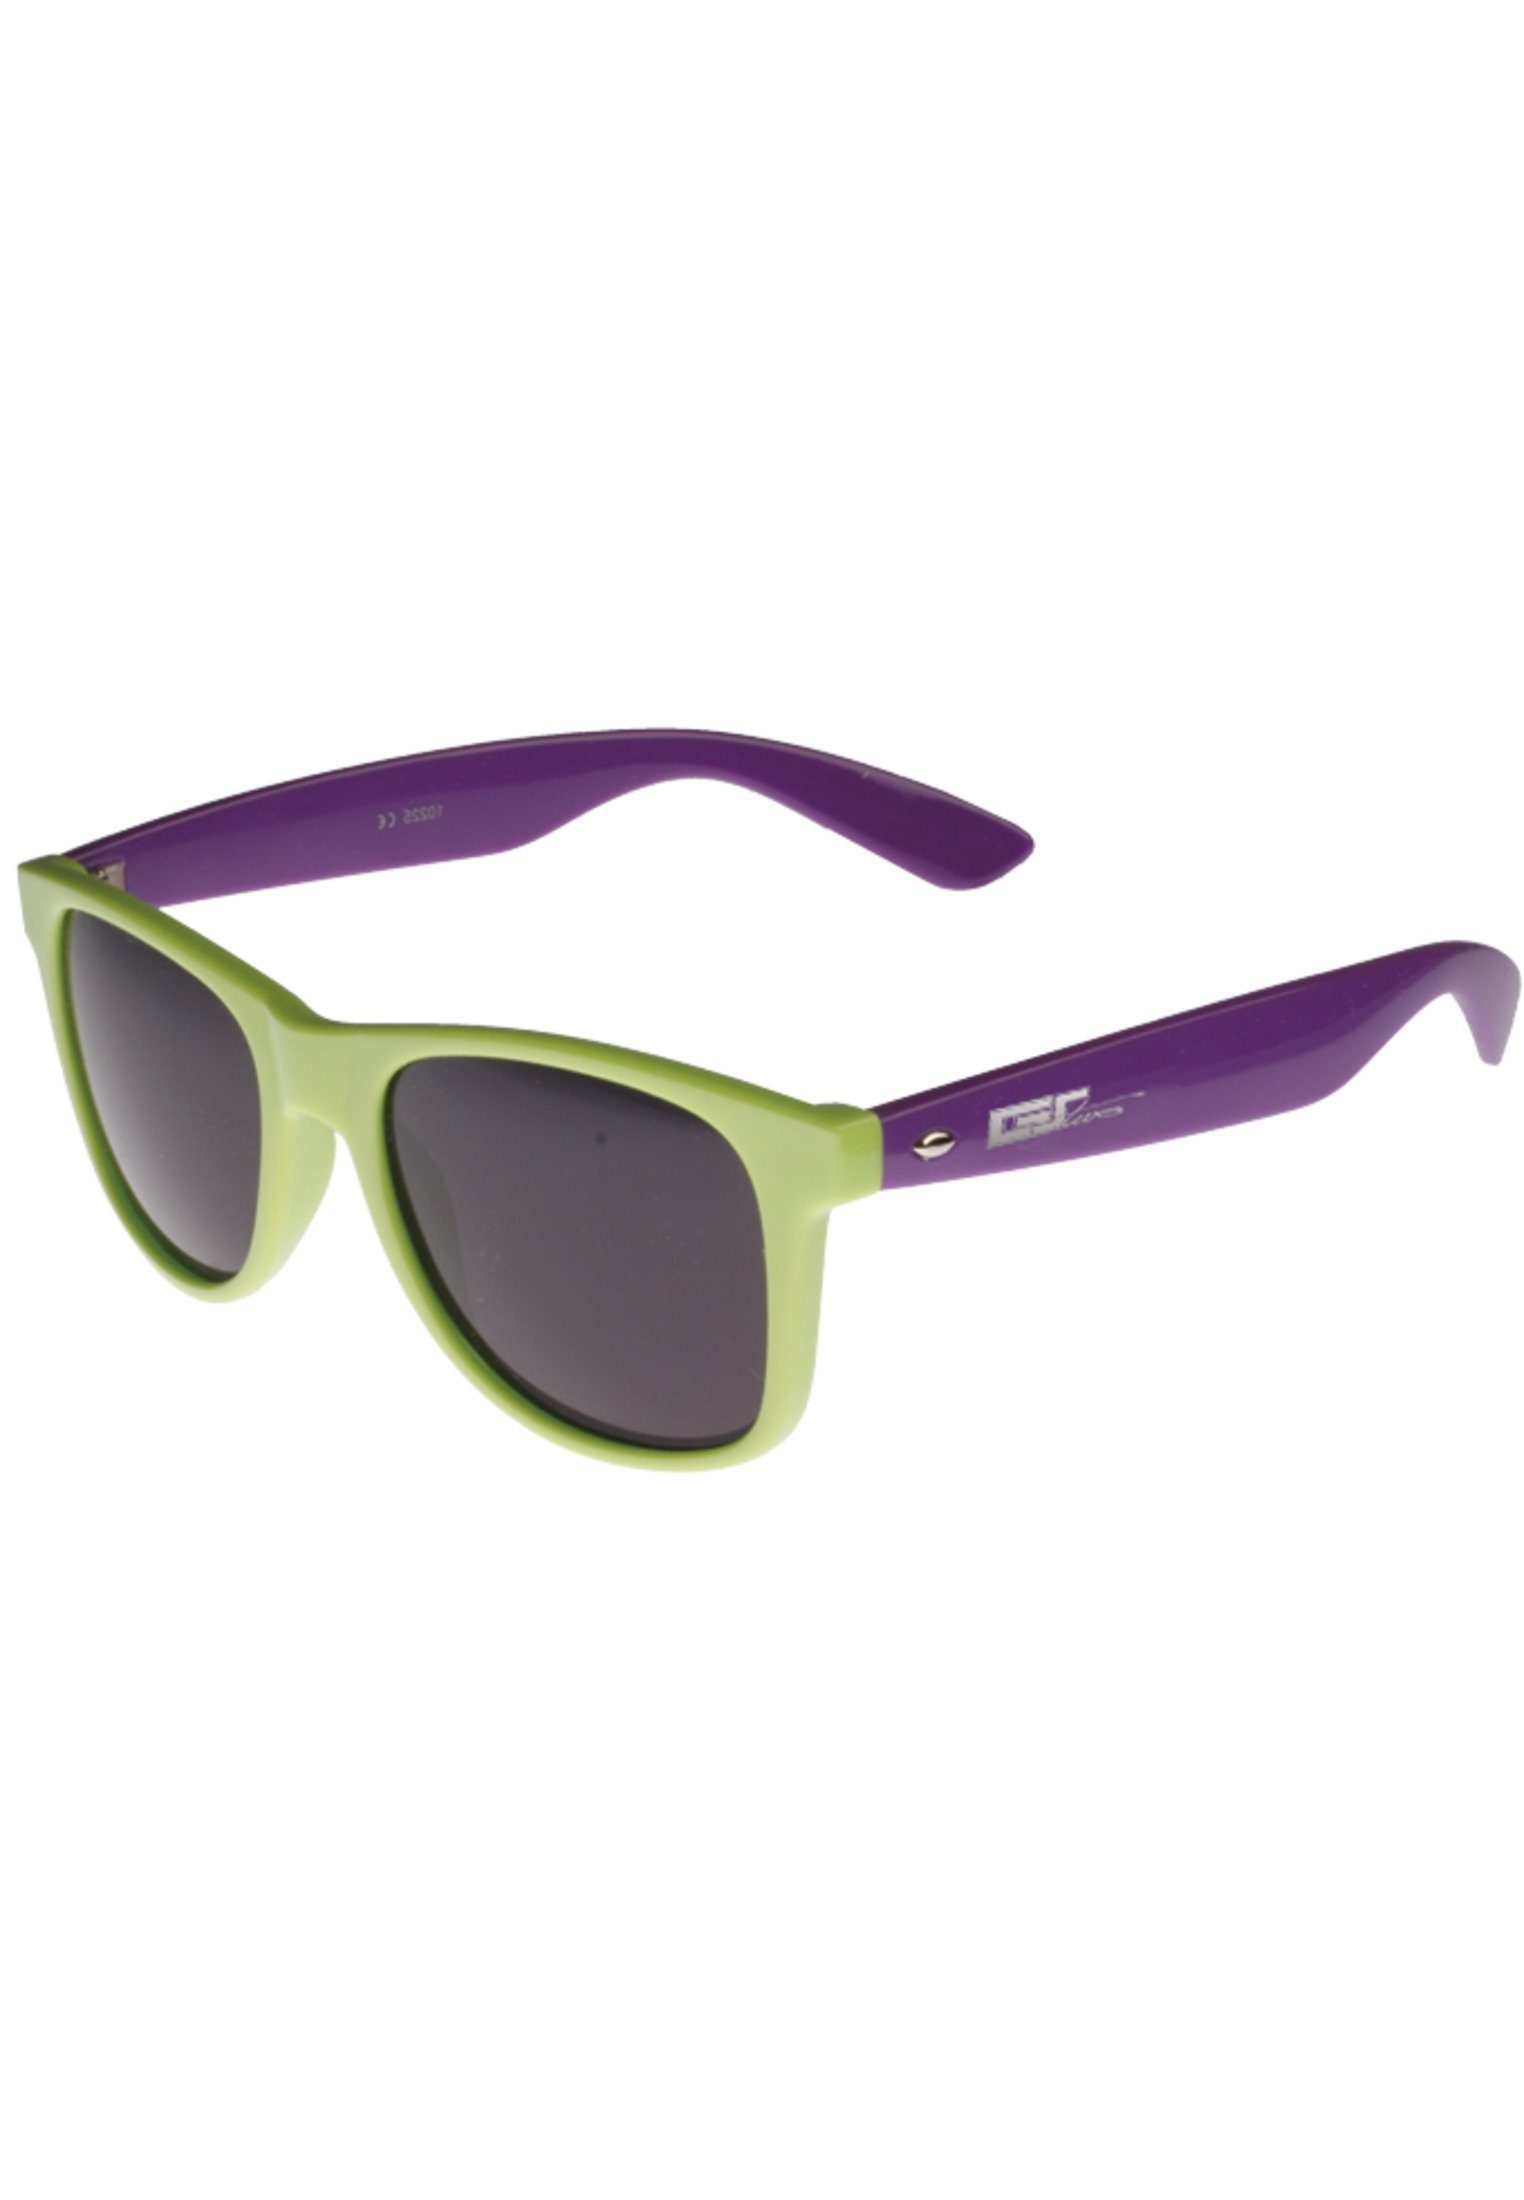 MSTRDS Sonnenbrille Accessoires Groove Shades limegreen/purple GStwo